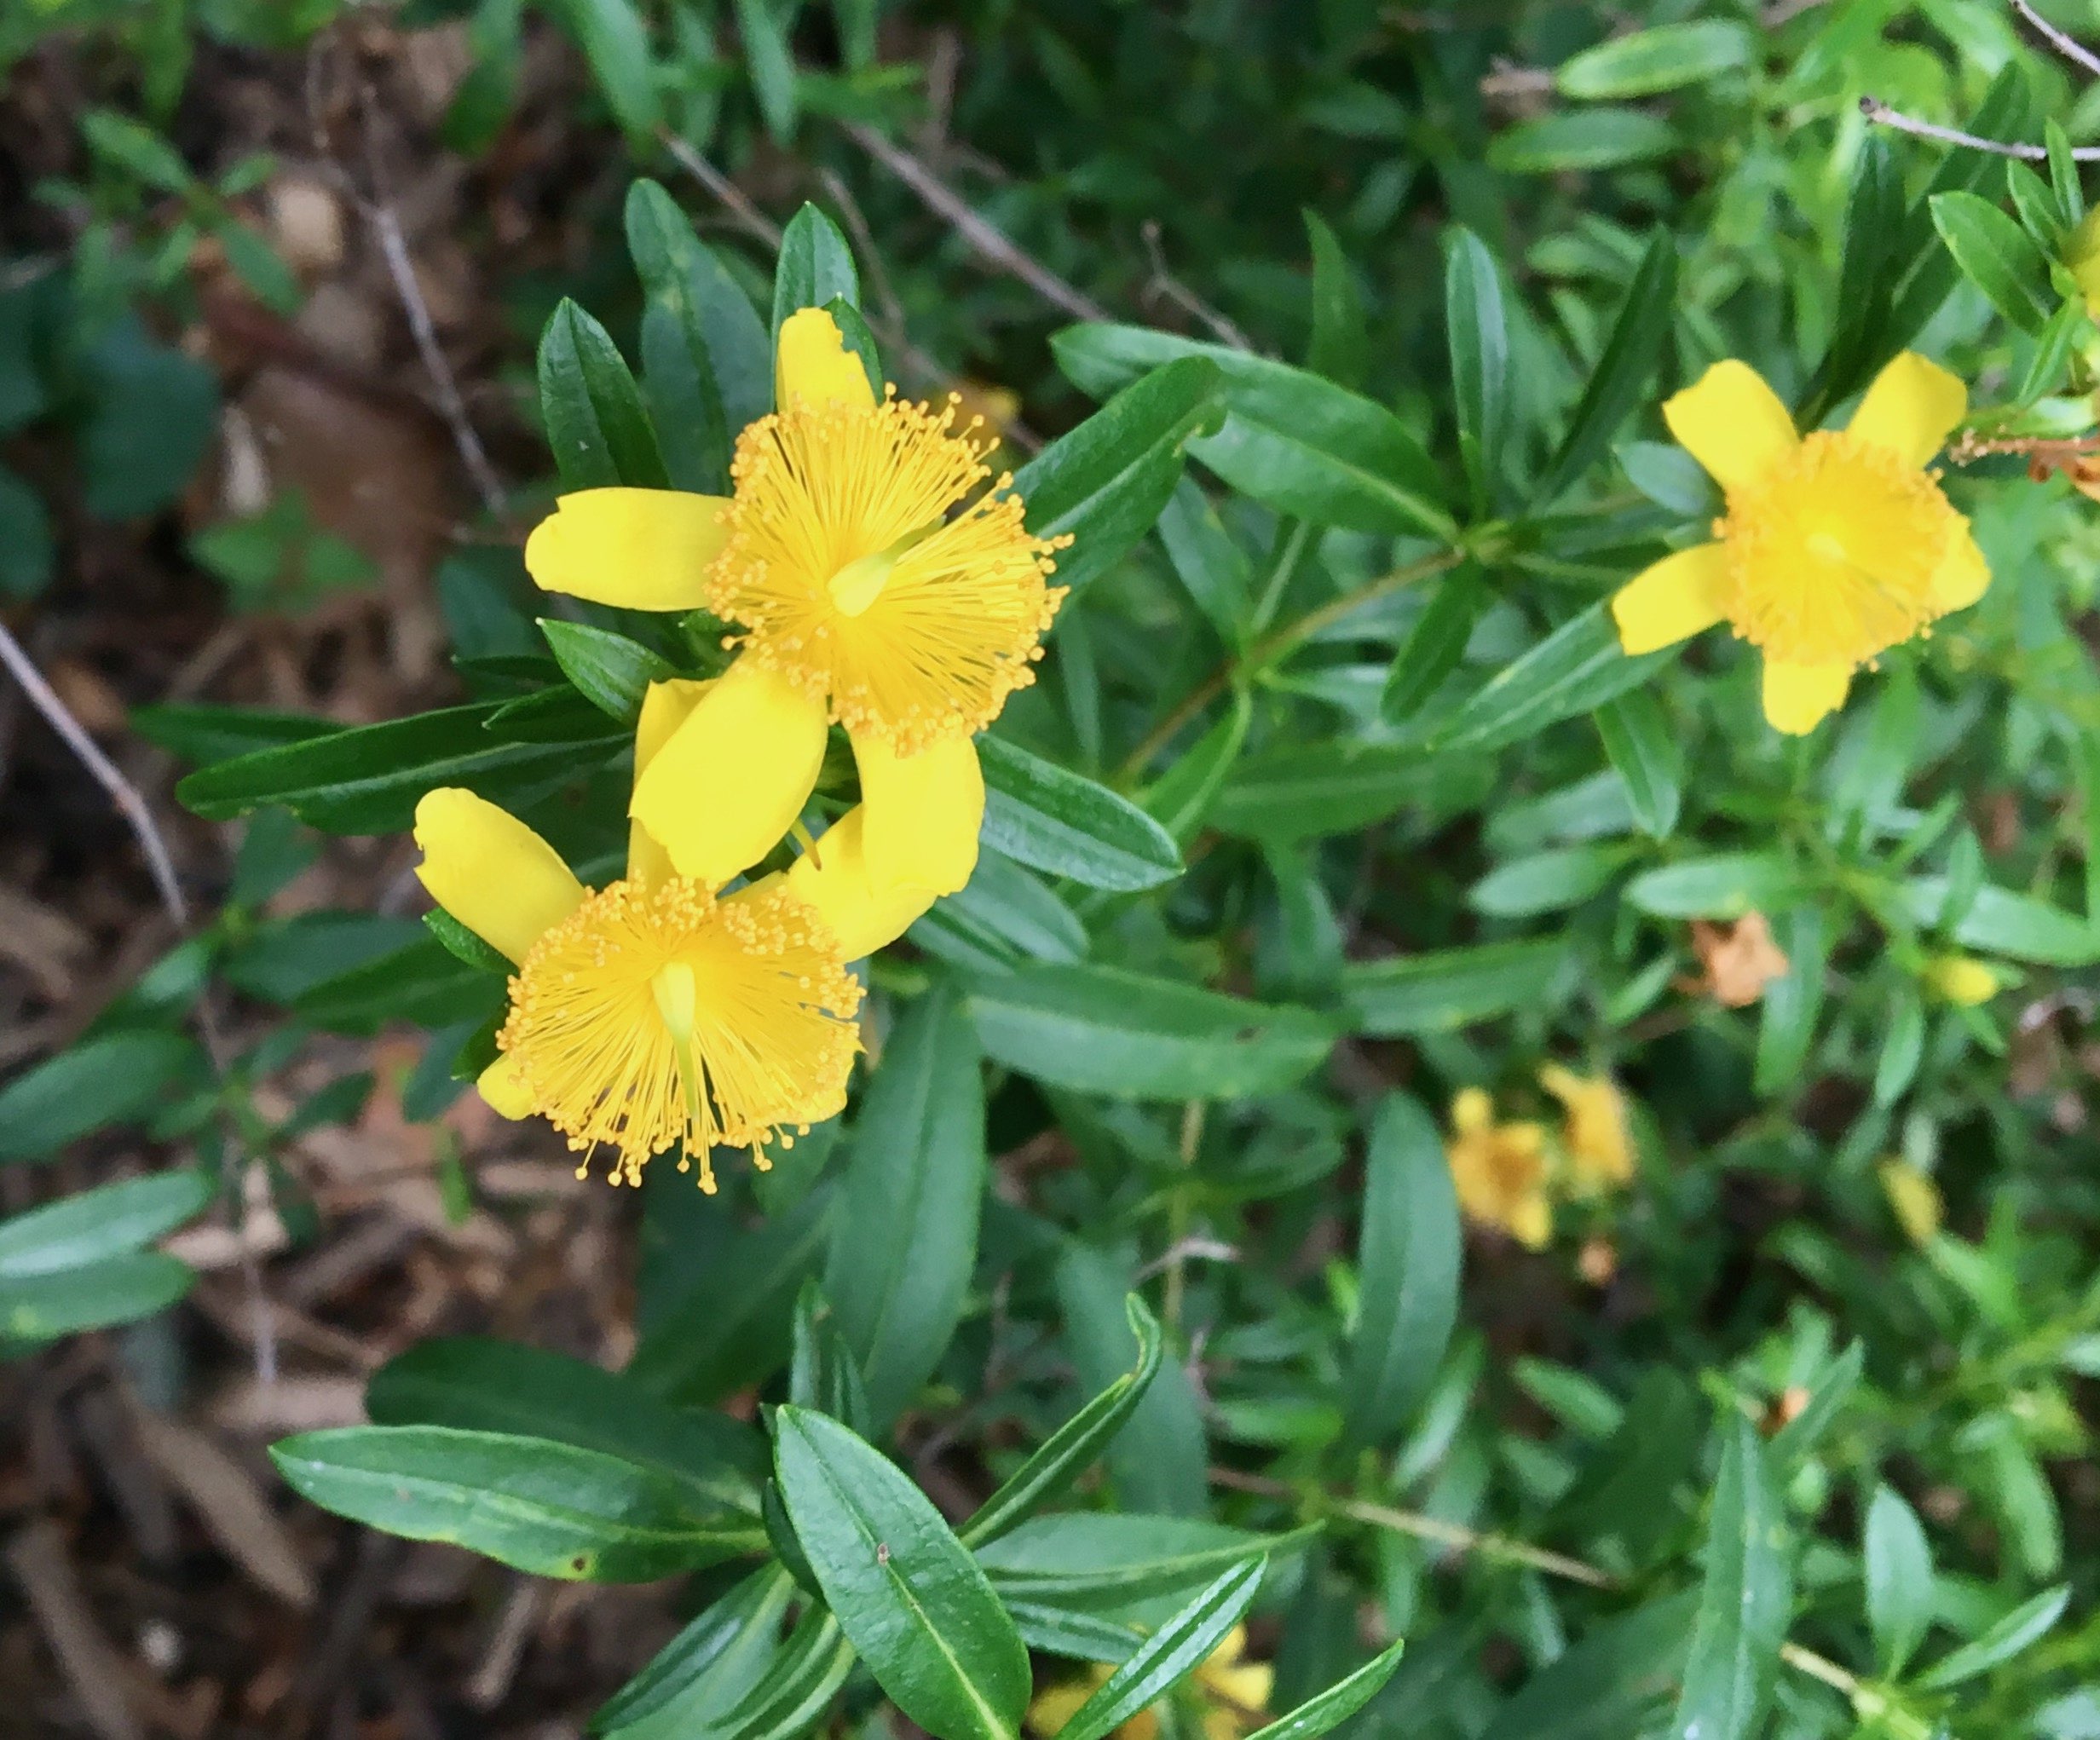 The Scientific Name is Hypericum prolificum [=Hypericum spathulatum]. You will likely hear them called Shrubby St. John's-wort. This picture shows the The 5 petals are outshown by the burst of yellow stamens of Hypericum prolificum [=Hypericum spathulatum]